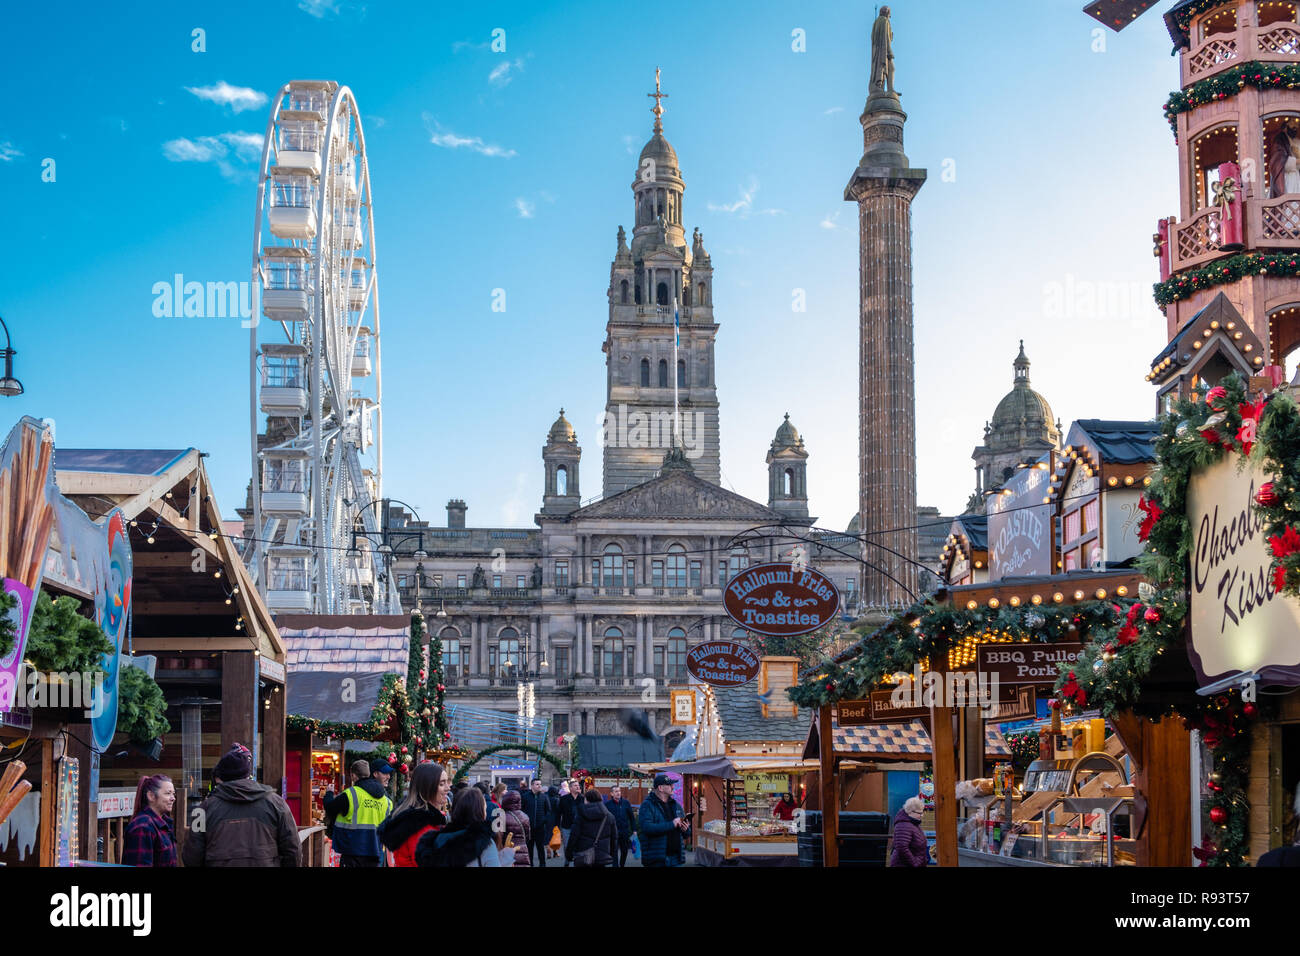 Glasgow, Scotland, UK - December 14, 2018: Looking over to George Square in Glasgow and the Christmas market in the square on the run up to Christmas. Stock Photo